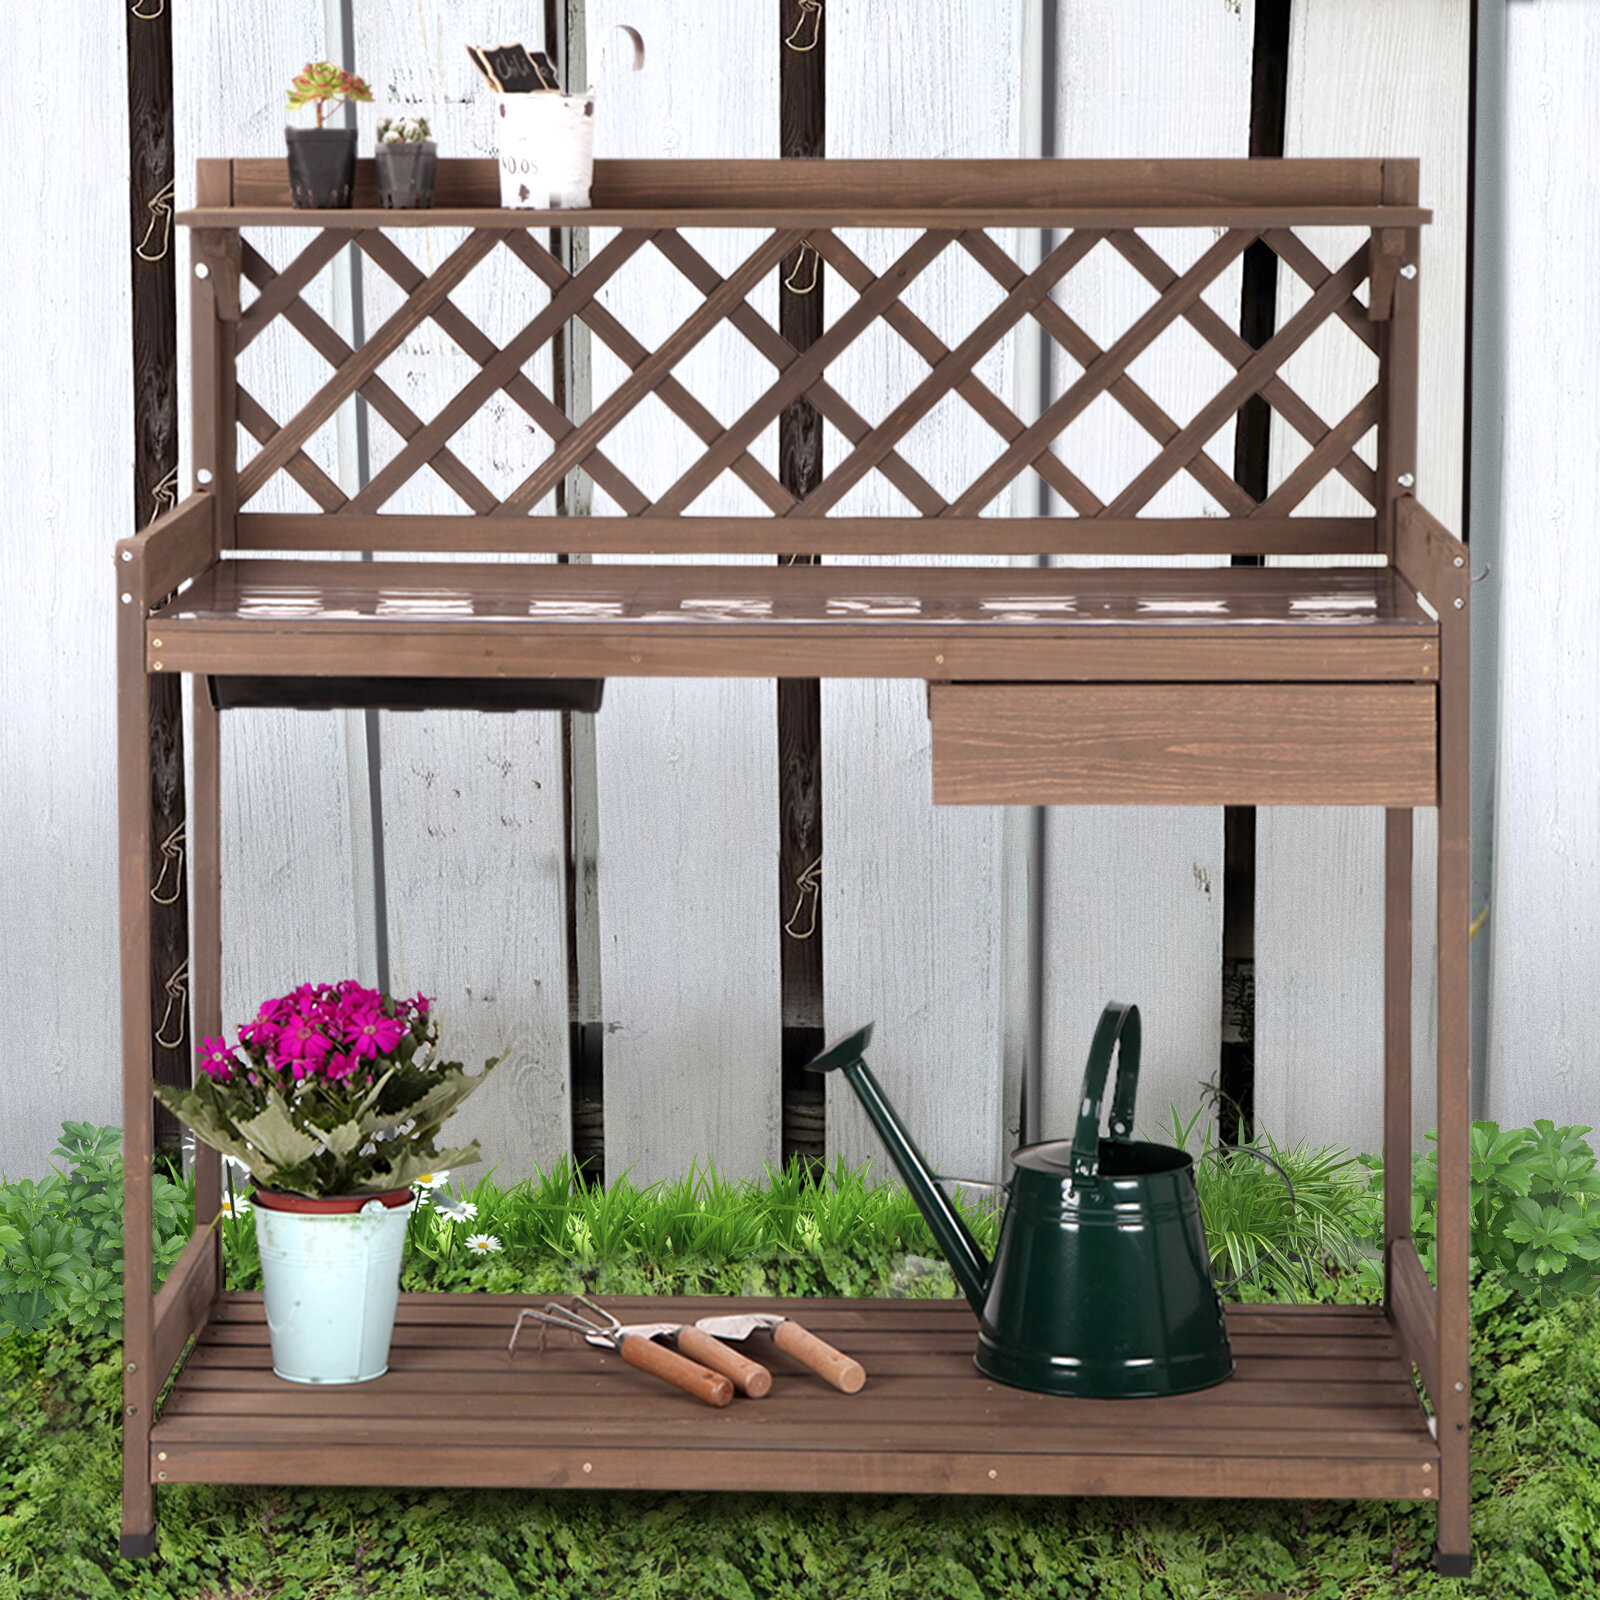 Angel611 Outdoor Wood Garden Plant Potting Bench Table Work Station Patio Furniture Shelf Chinese fir Wood Very Durable and Sturdy 